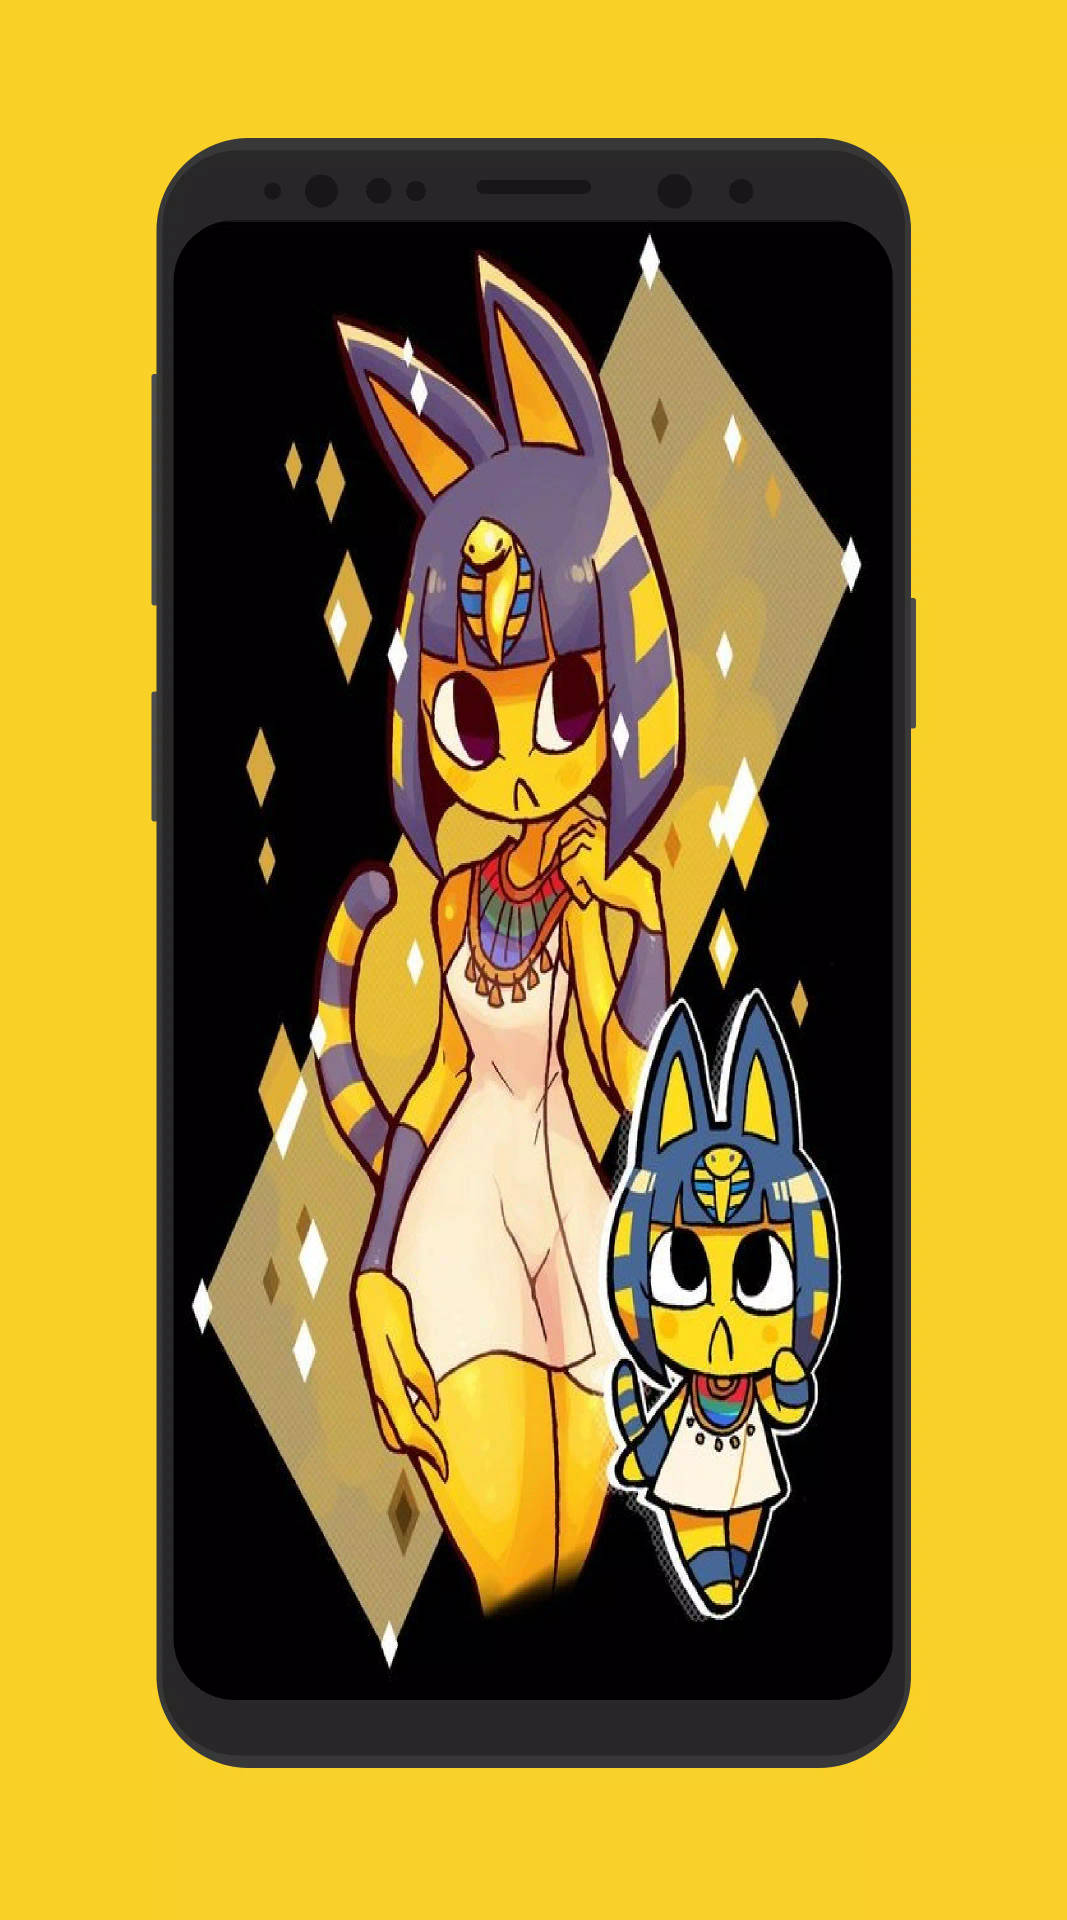 “Be yourself and ignore the paws that judge you.” – Ankha from Animal Crossing Wallpaper